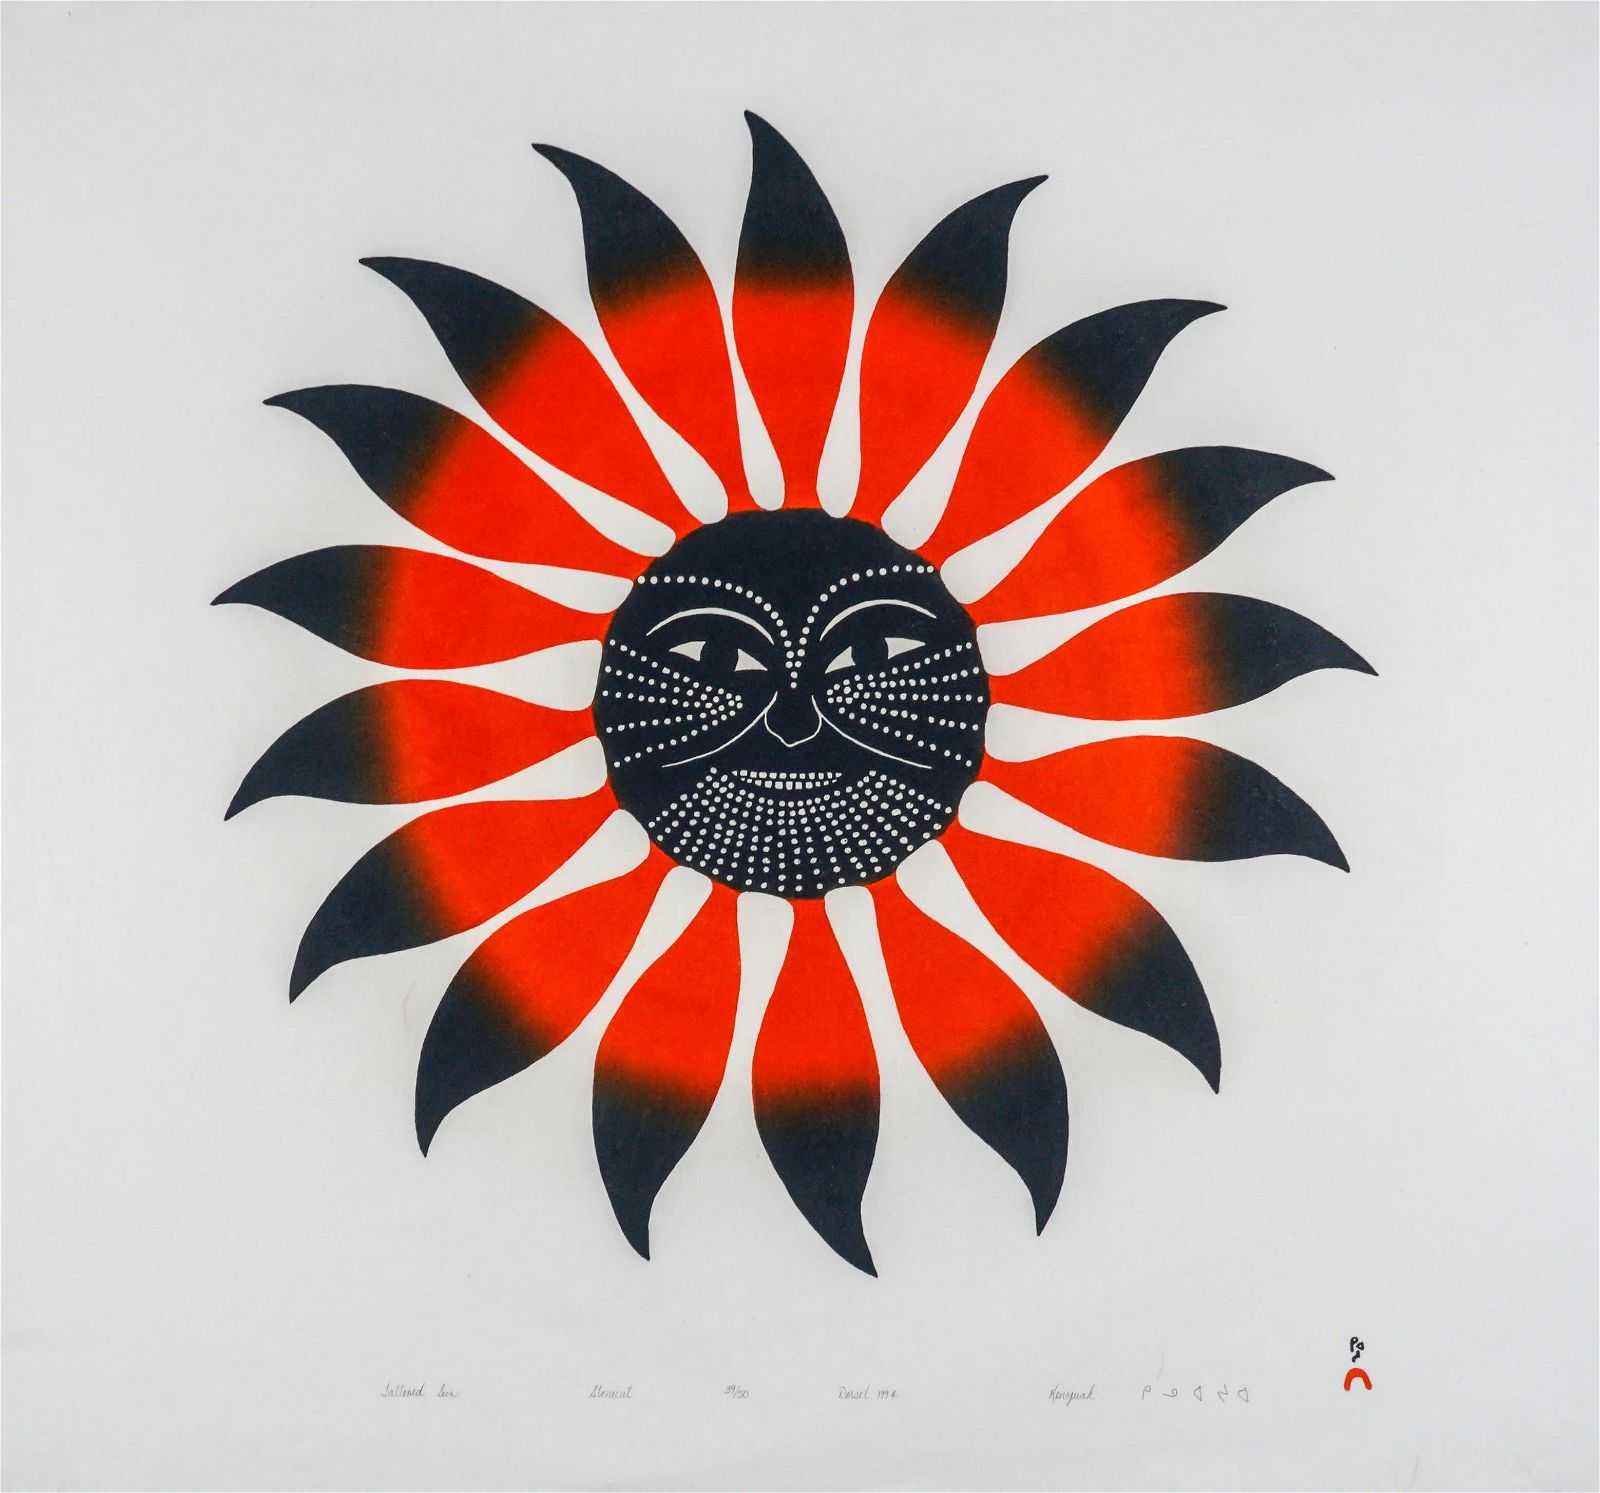 Kenojuak Ashevak’s 1994 stonecut ‘Tattooed Sun’ took CA$7,000 ($5,155) plus the buyer’s premium in October 2020. Image courtesy of First Arts Premiers Inc. and LiveAuctioneers.